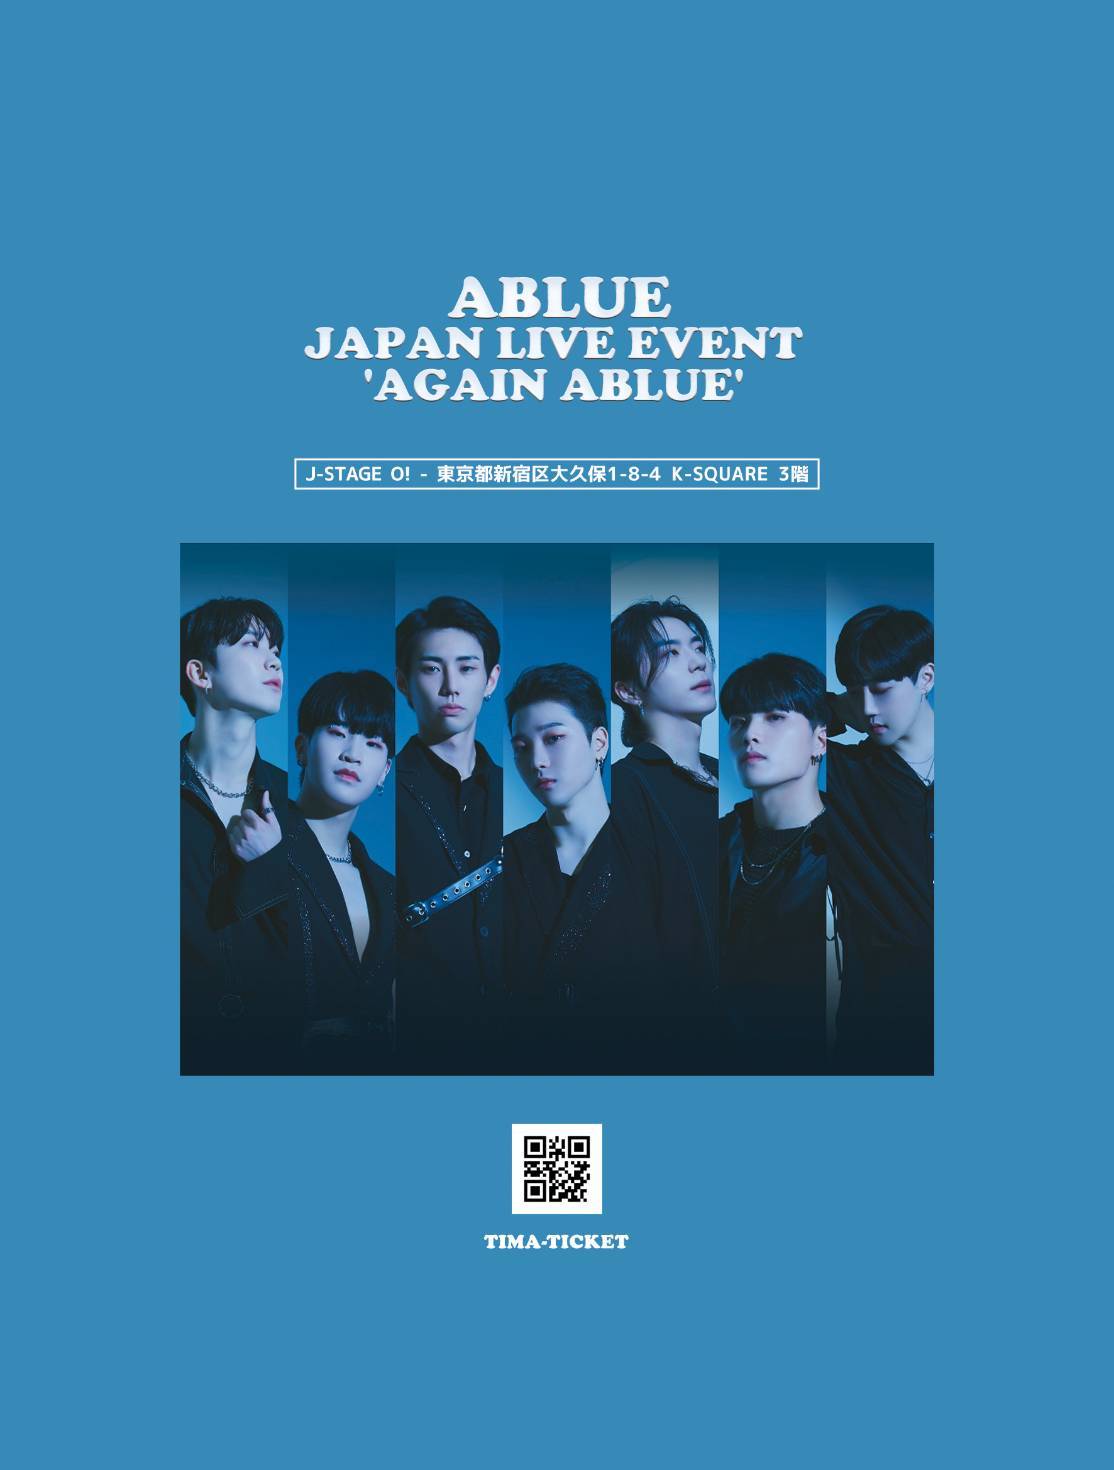 ABLUE JAPAN LIVE EVENT AGAIN ABLUE - パジャマDAY